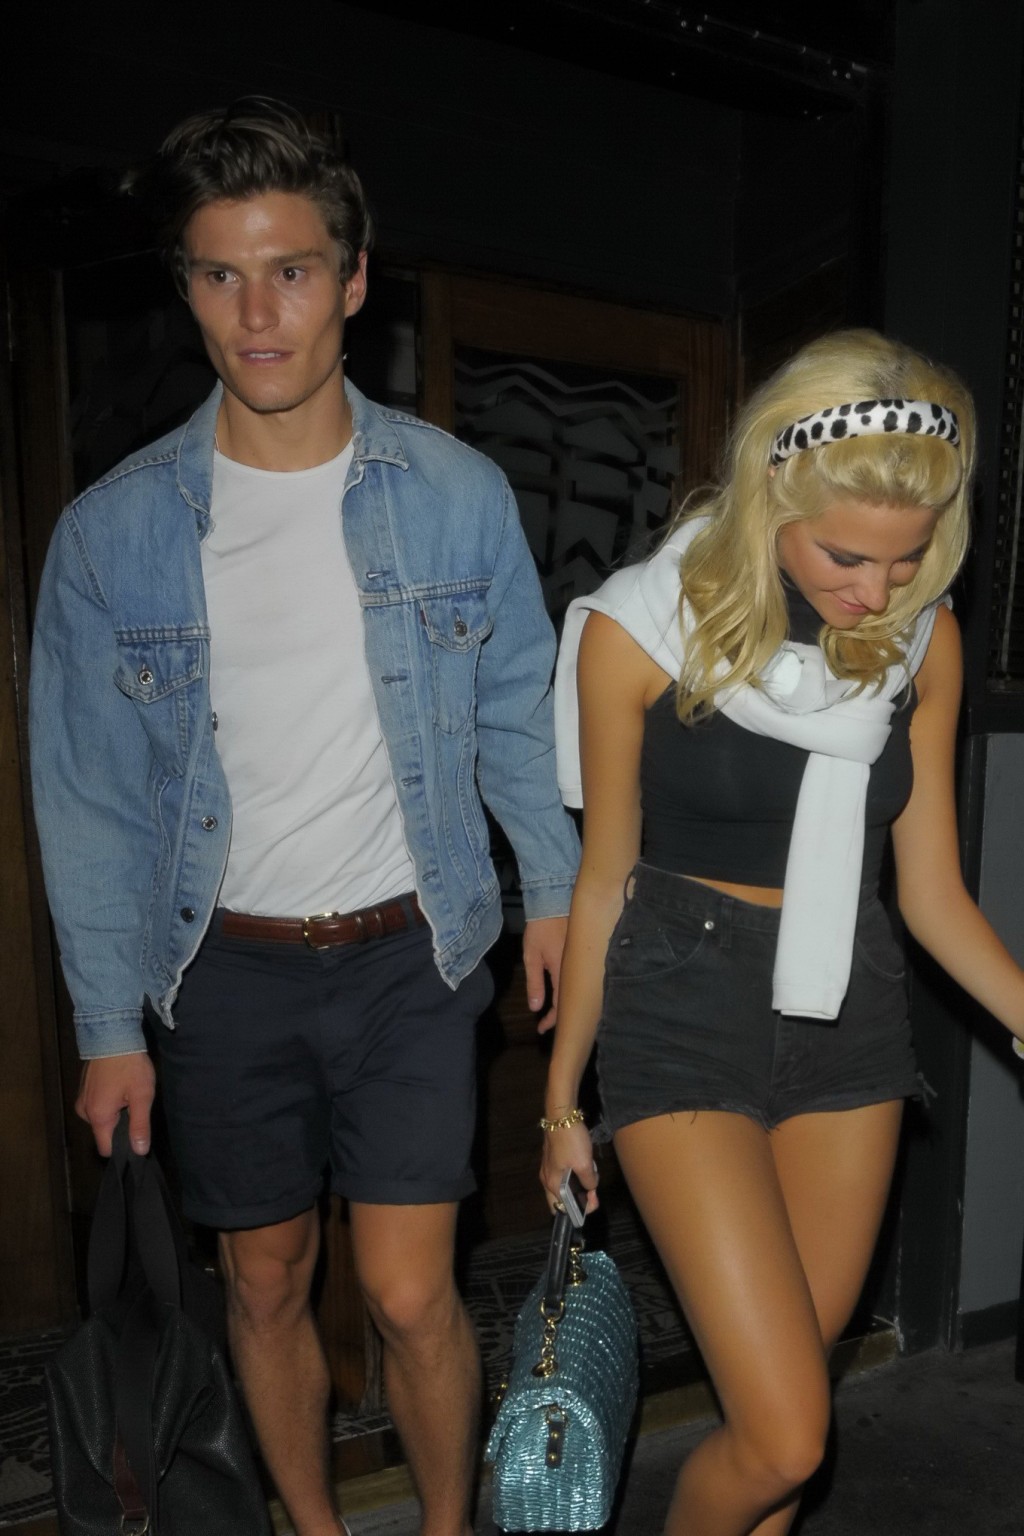 Pixie Lott wearing tight black belly top and shorts night out in London #75223728